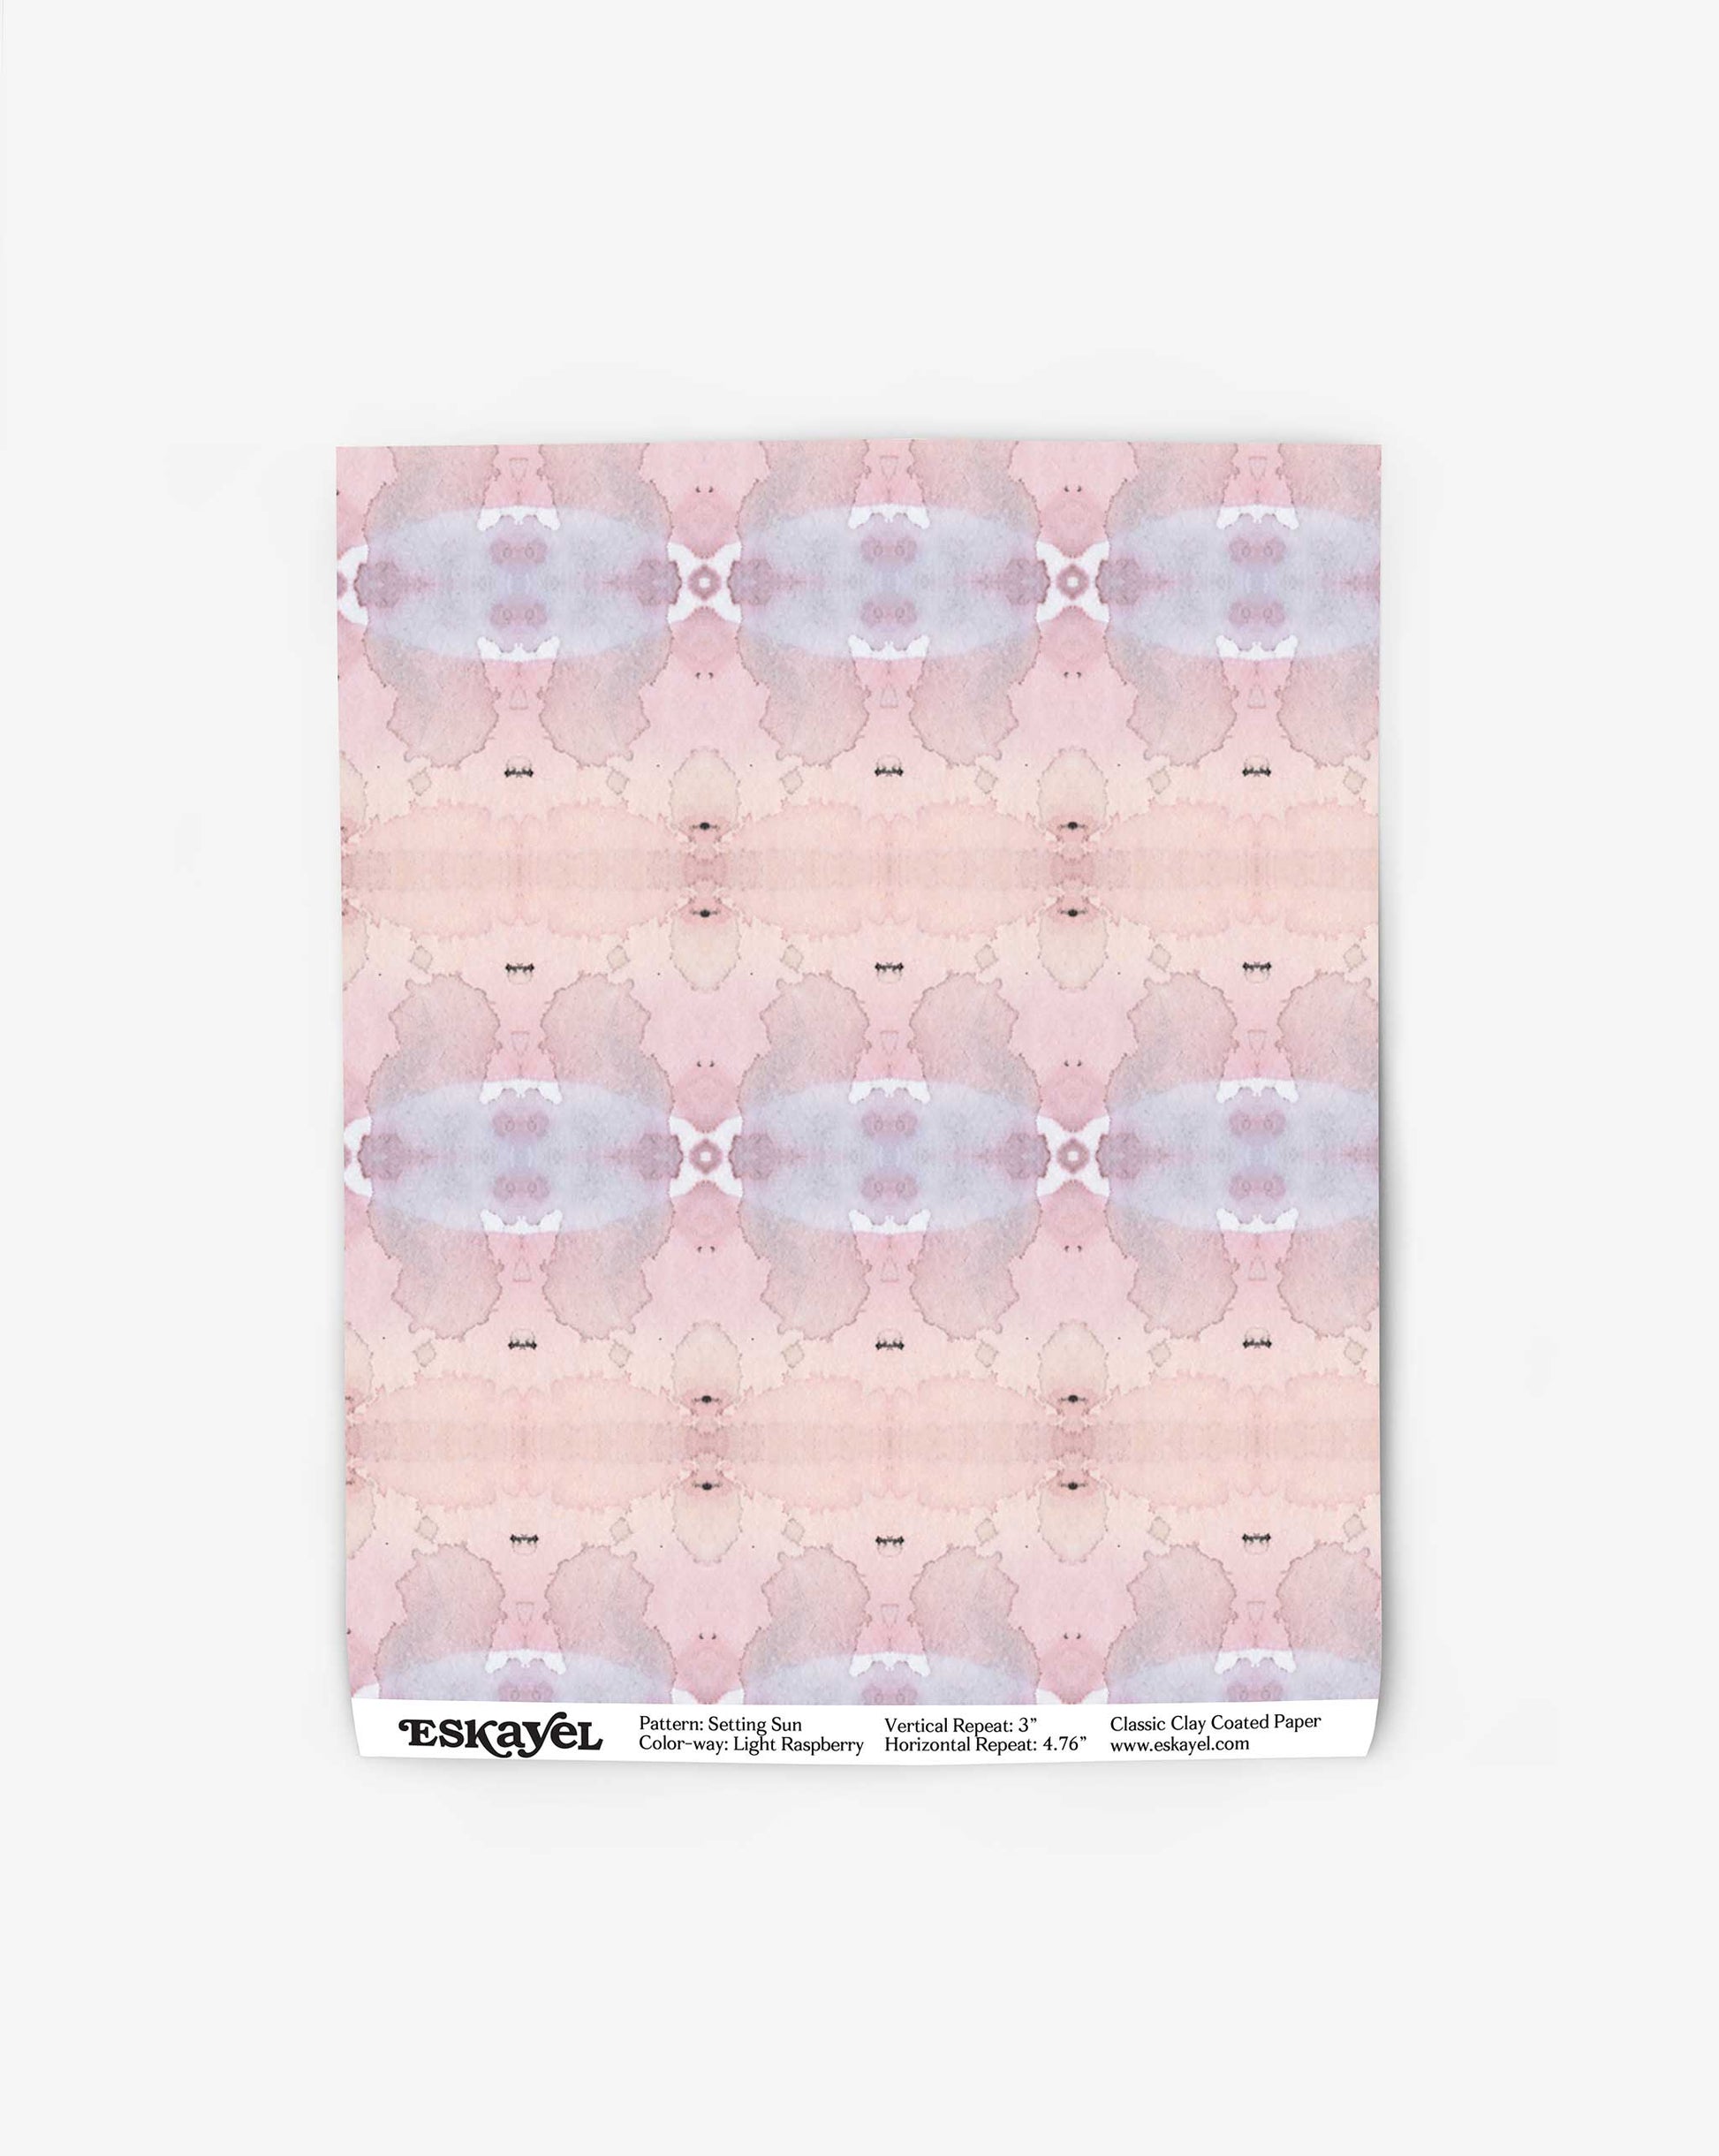 A sheet of light raspberry, abstract-patterned paper with the brand name "Setting Sun Wallpaper||Light Raspberry" and product details printed at the bottom.